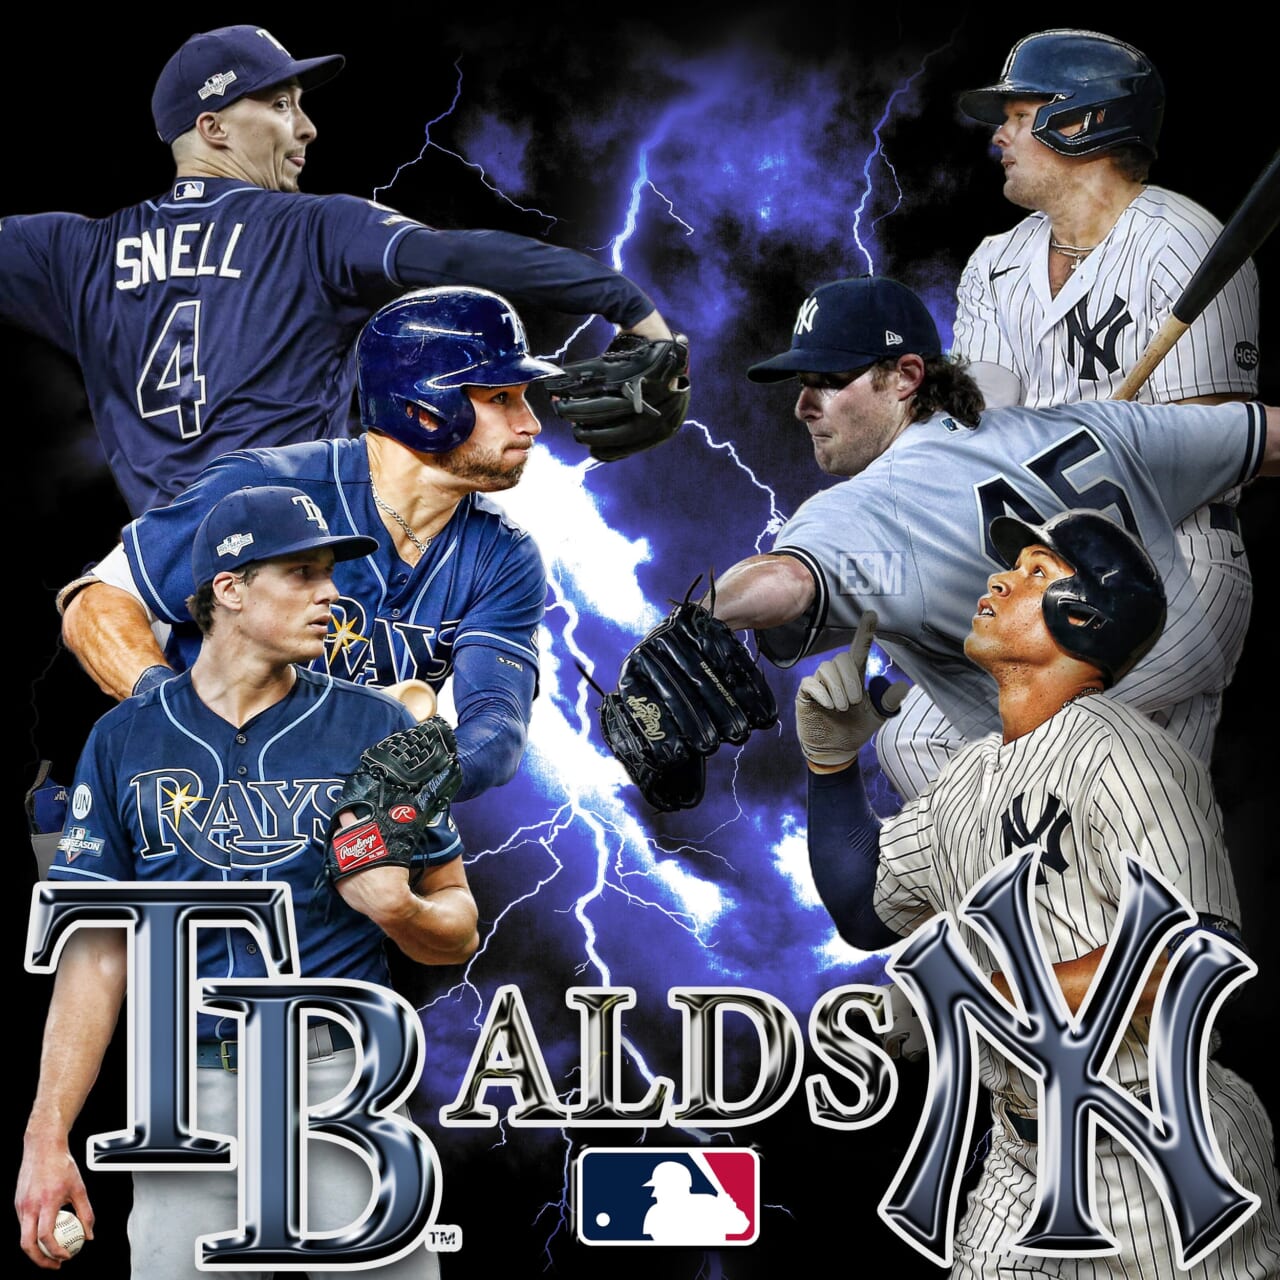 New York Yankees Postseason Preview: Yankees up one game in the ALDS send Dievi Garcia to the mound (video)